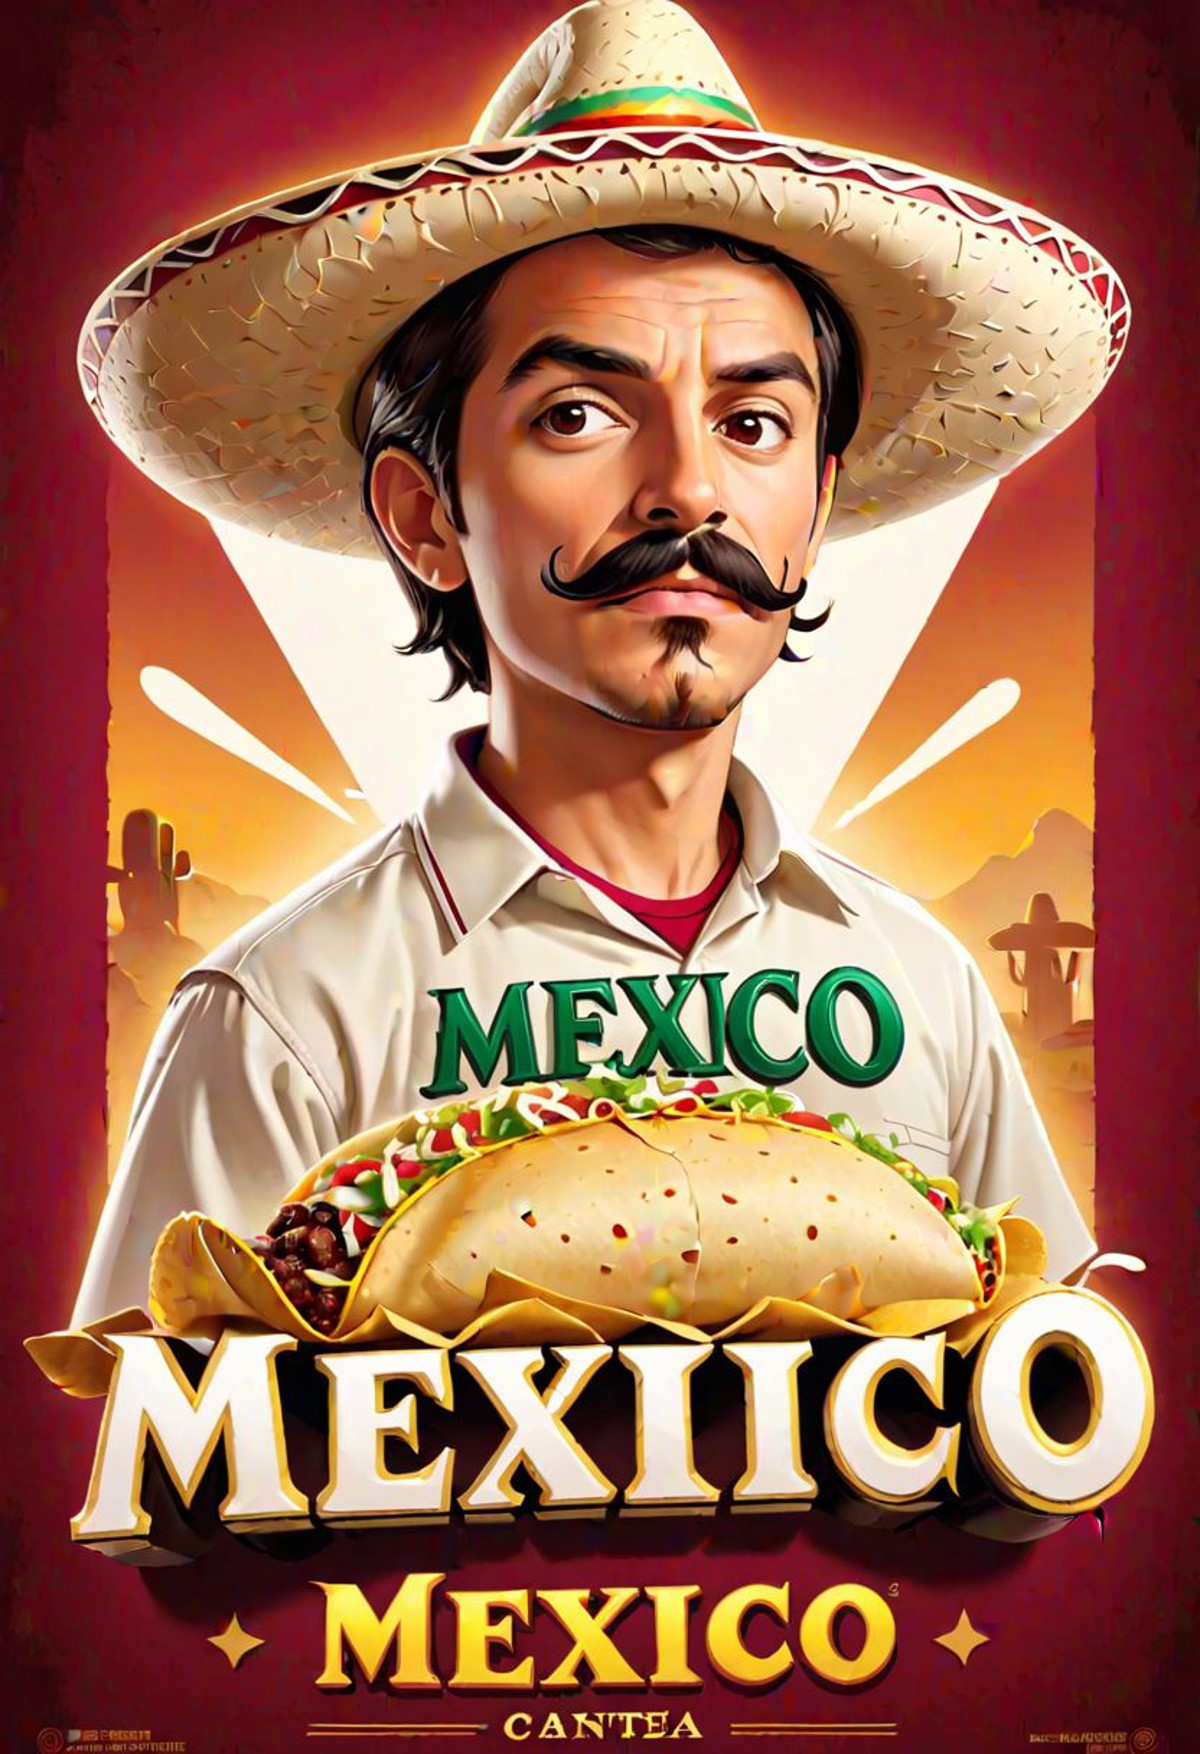 The word ("MEXICO":1.2) spelled out, movie poster, text logo, man wearing a sombrero, burrito, taco, moustache, mexican ca...